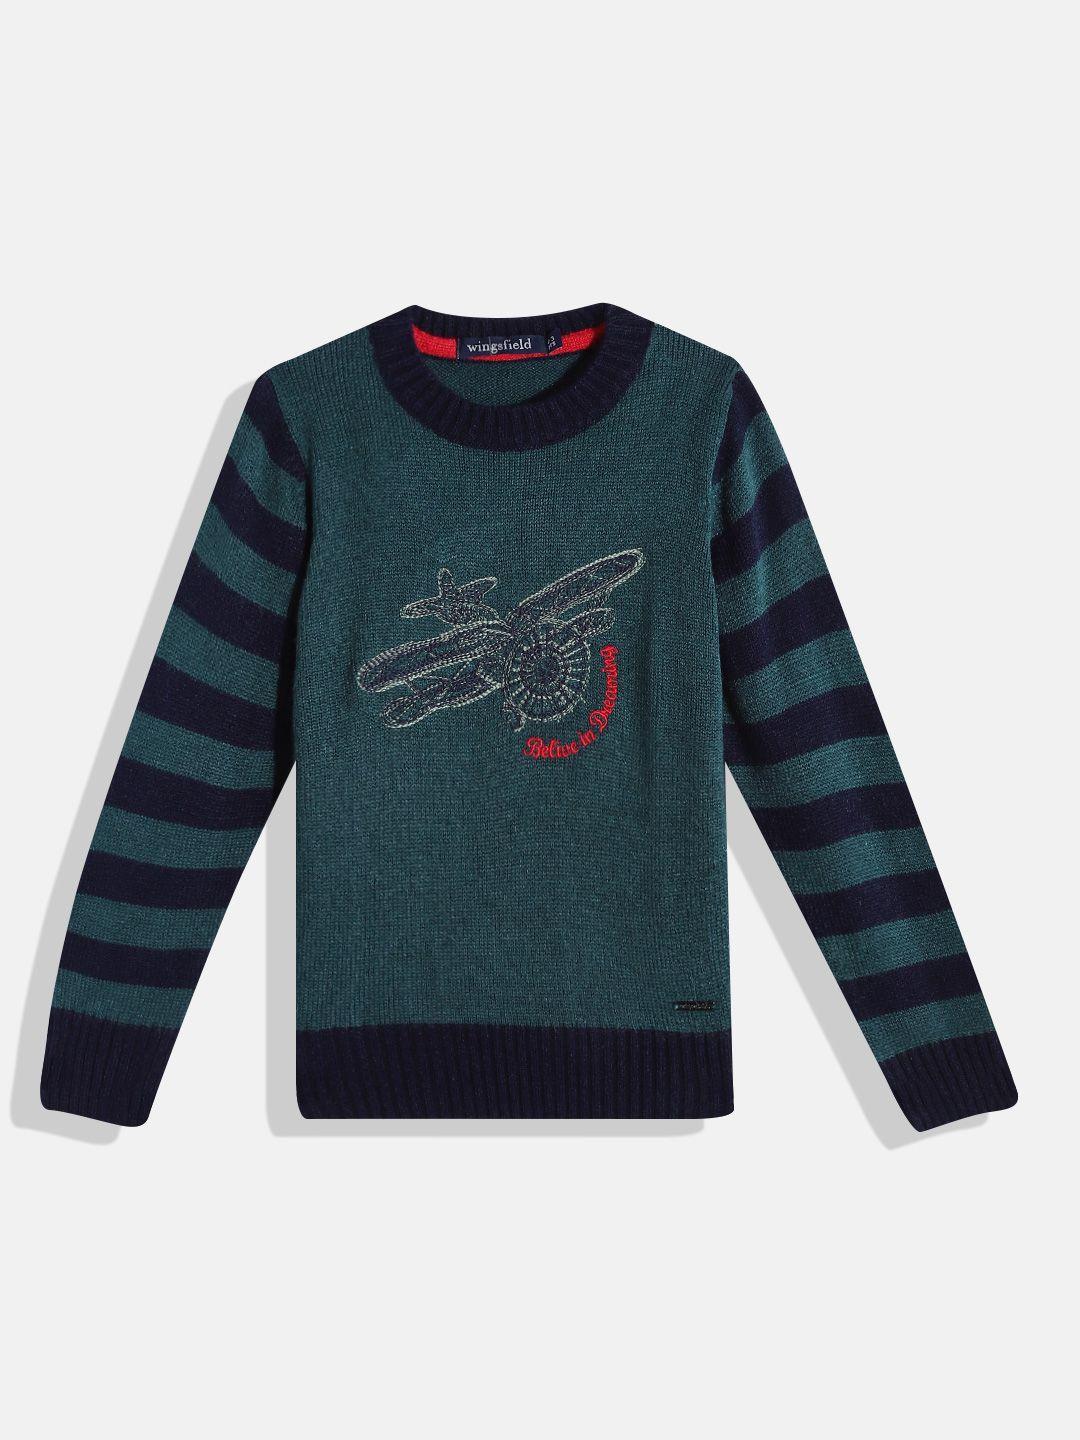 Wingsfield Boys Green Graphic Printed Pullover